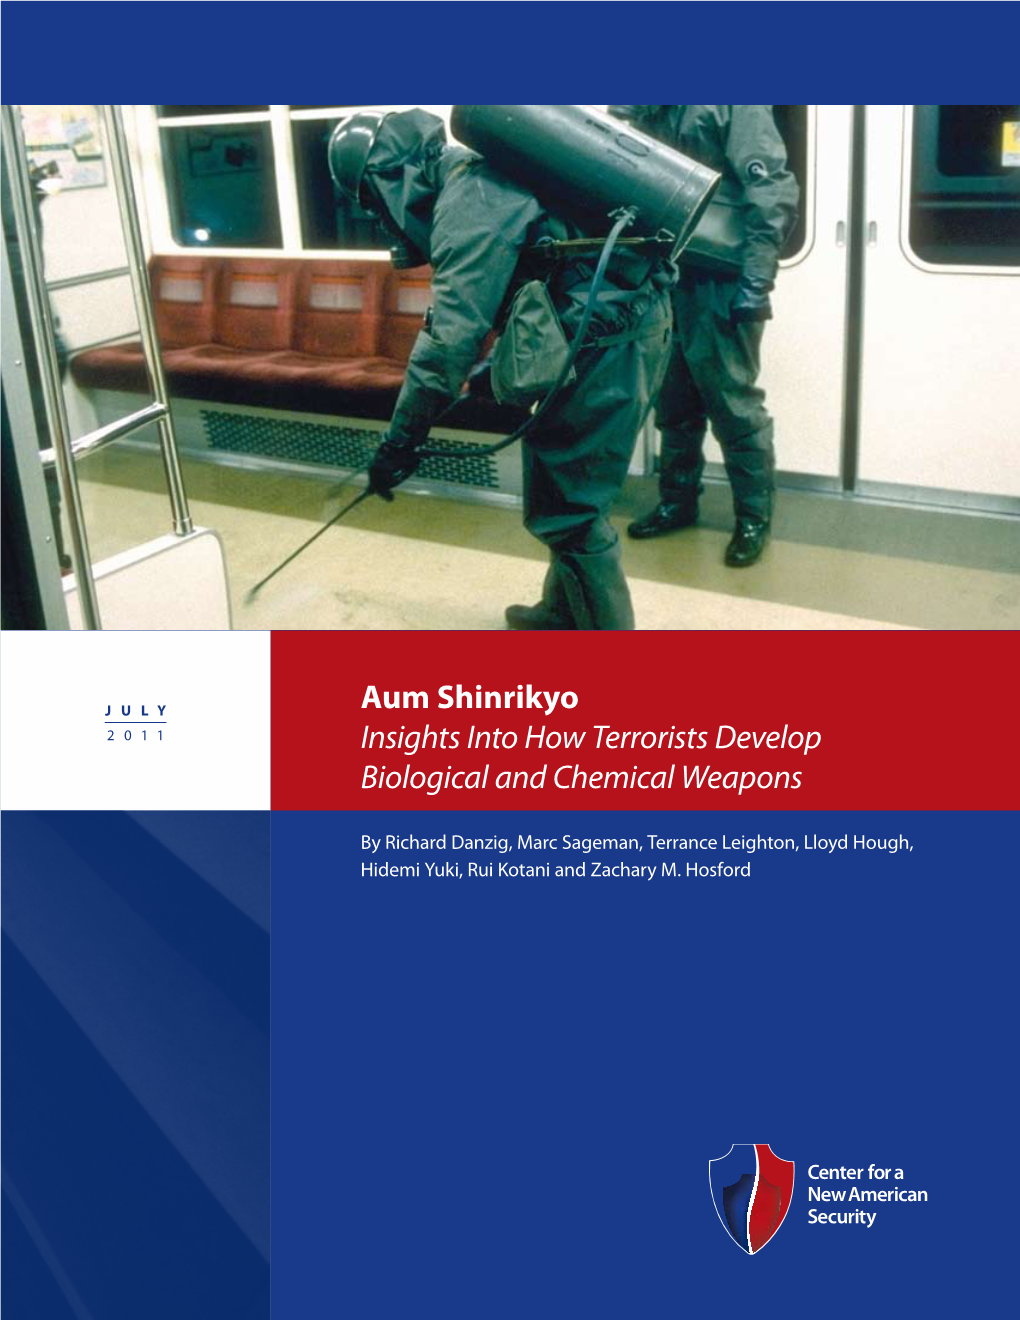 Aum Shinrikyo: Insights Into How Terrorists Develop Biological and Chemical Weapons